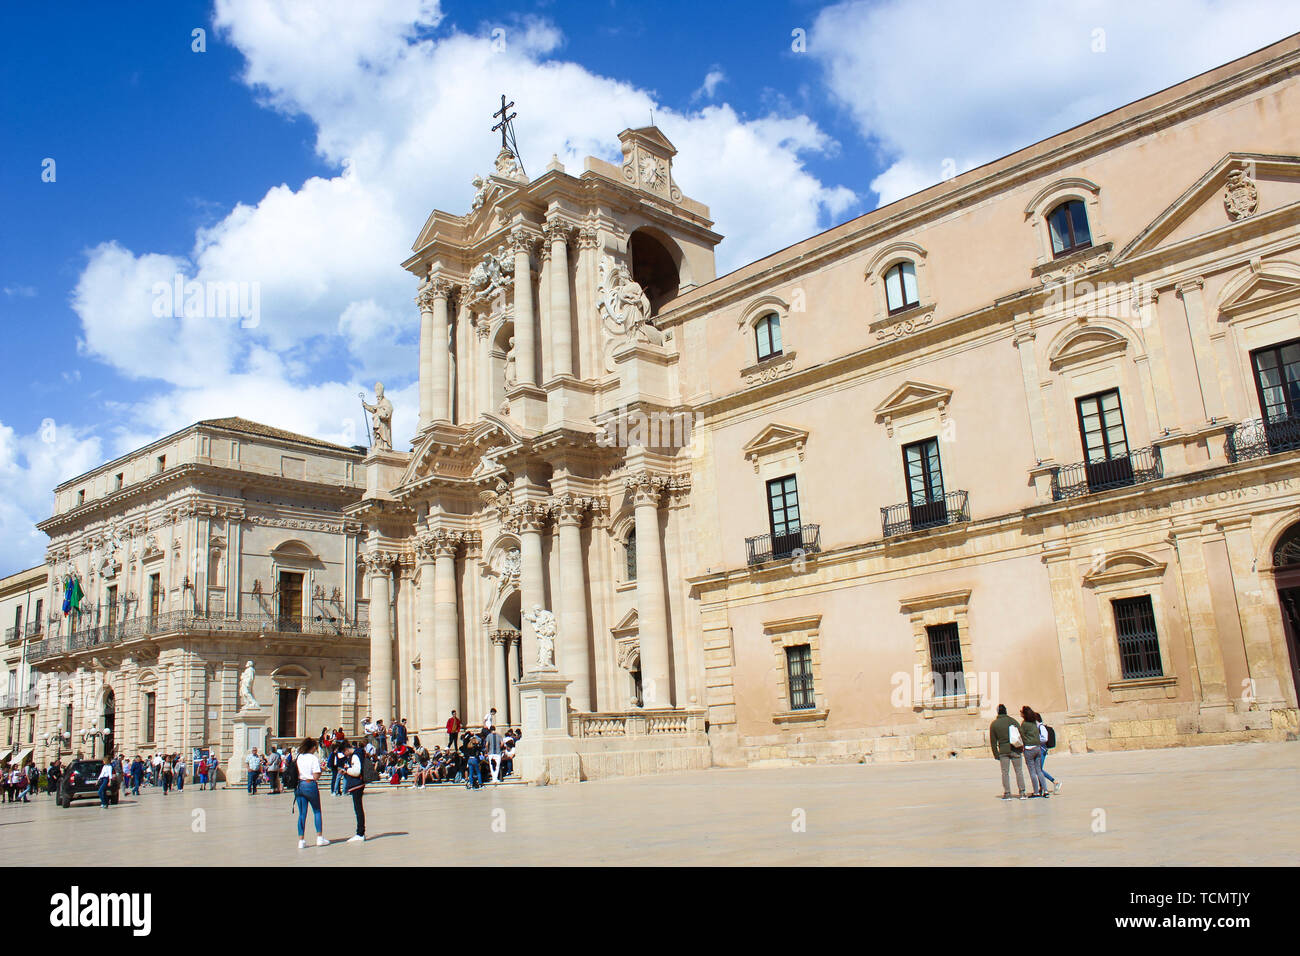 Syracuse, Italy - Apr 10th 2019: Beautiful Roman Catholic Cathedral of Syracuse in Sicily with tourists on the adjacent square. The church is part of UNESCO World Heritage. Popular tourist attraction. Stock Photo